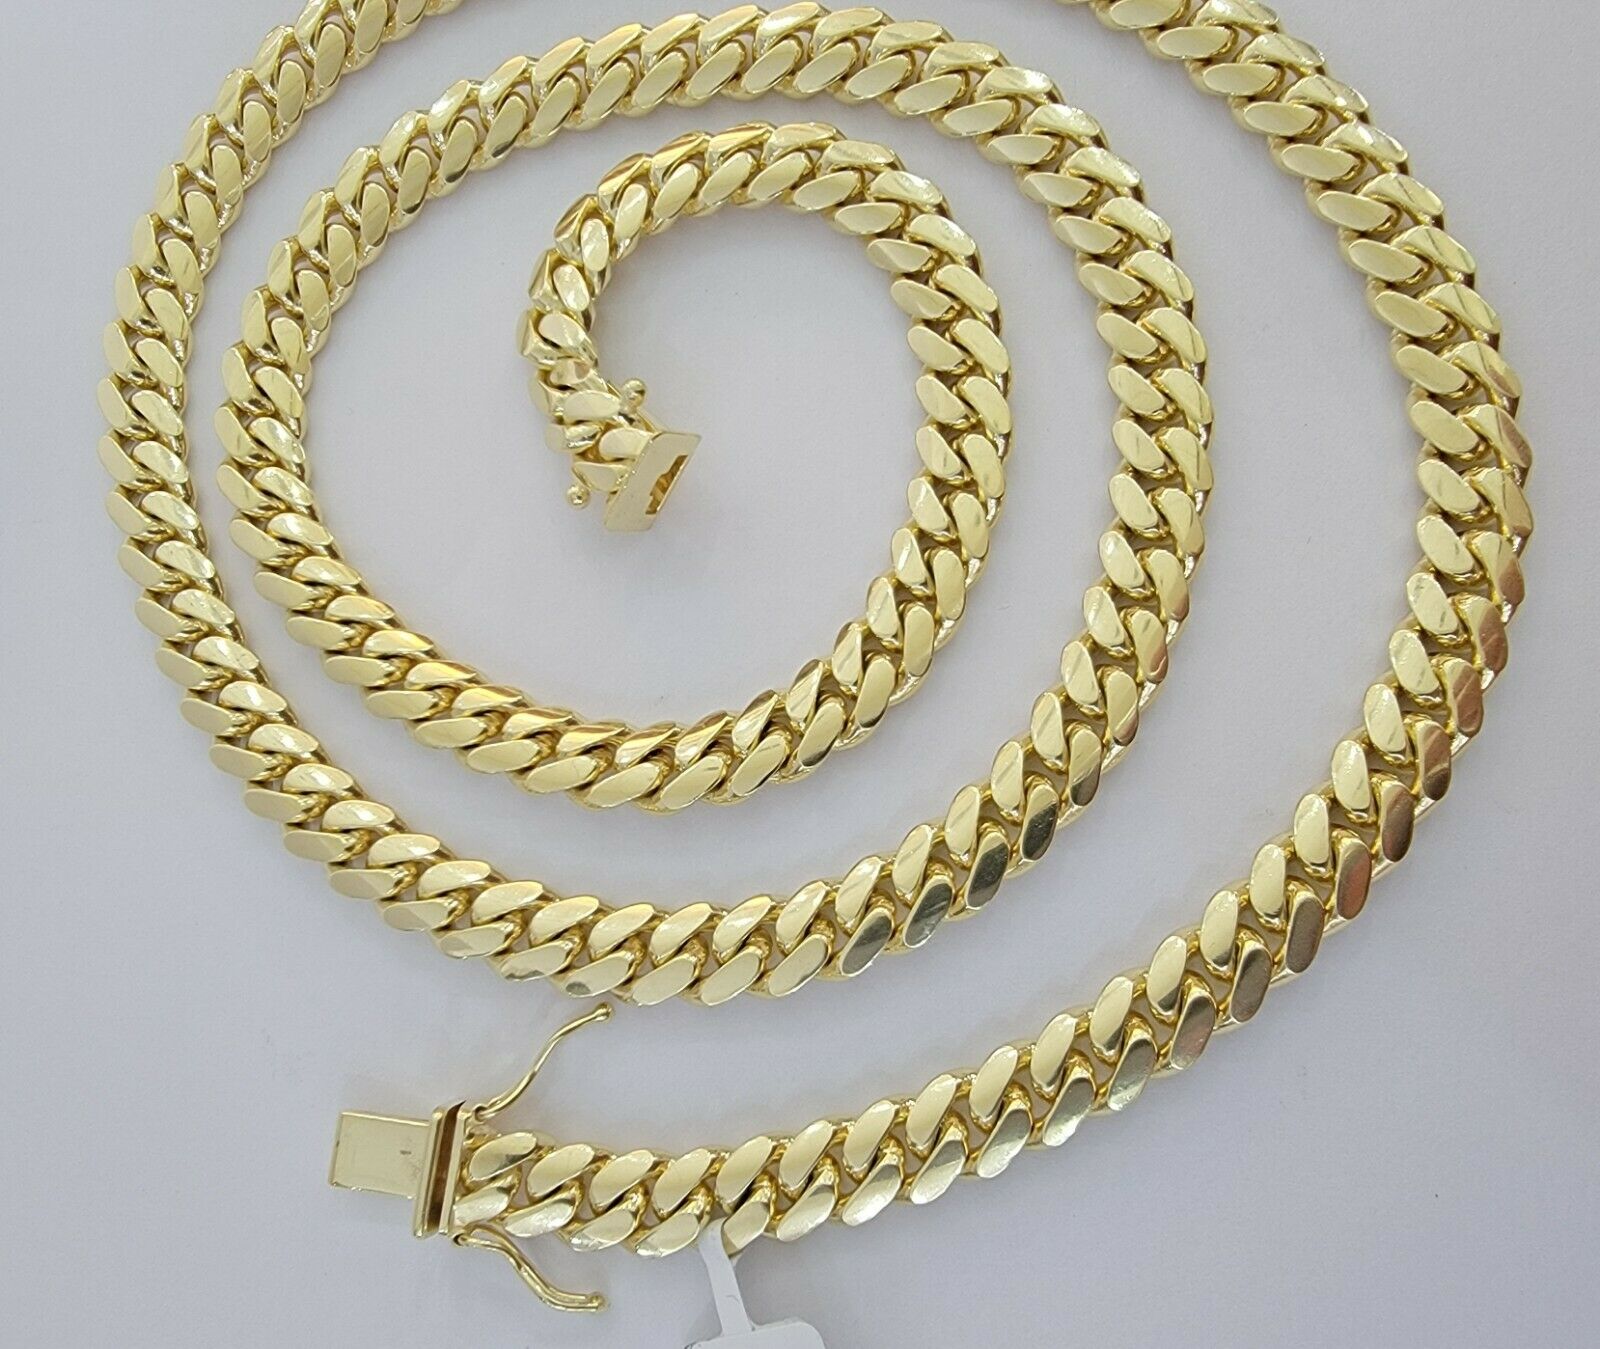 Real 10k Gold Chain Miami Cuban Solid Link Necklace 24" Inch 7mm 10KT BOX CLASP